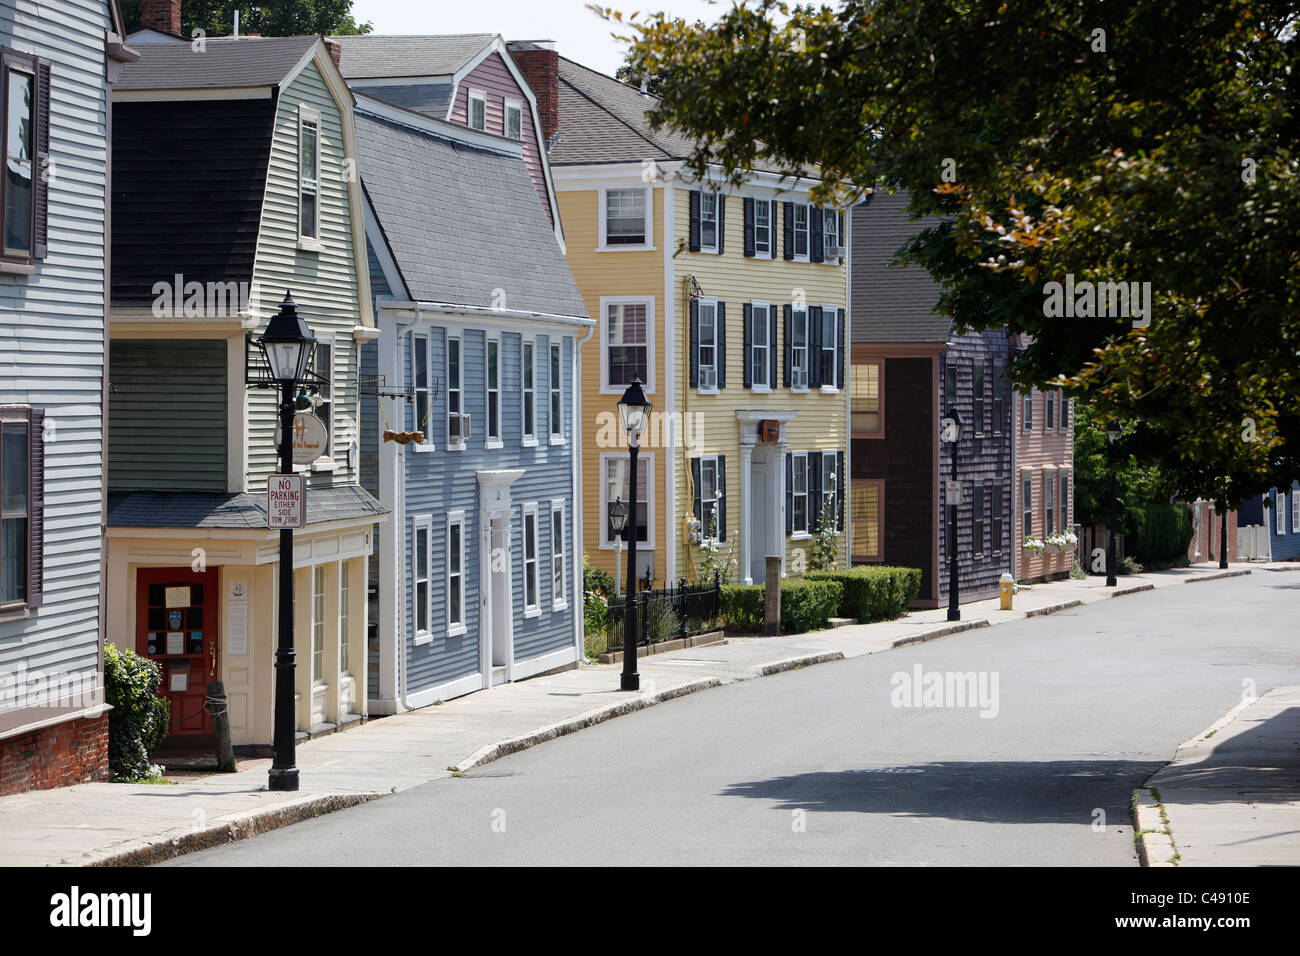 18th century colonial houses line a street in Marblehead, Massachusetts Stock Photo